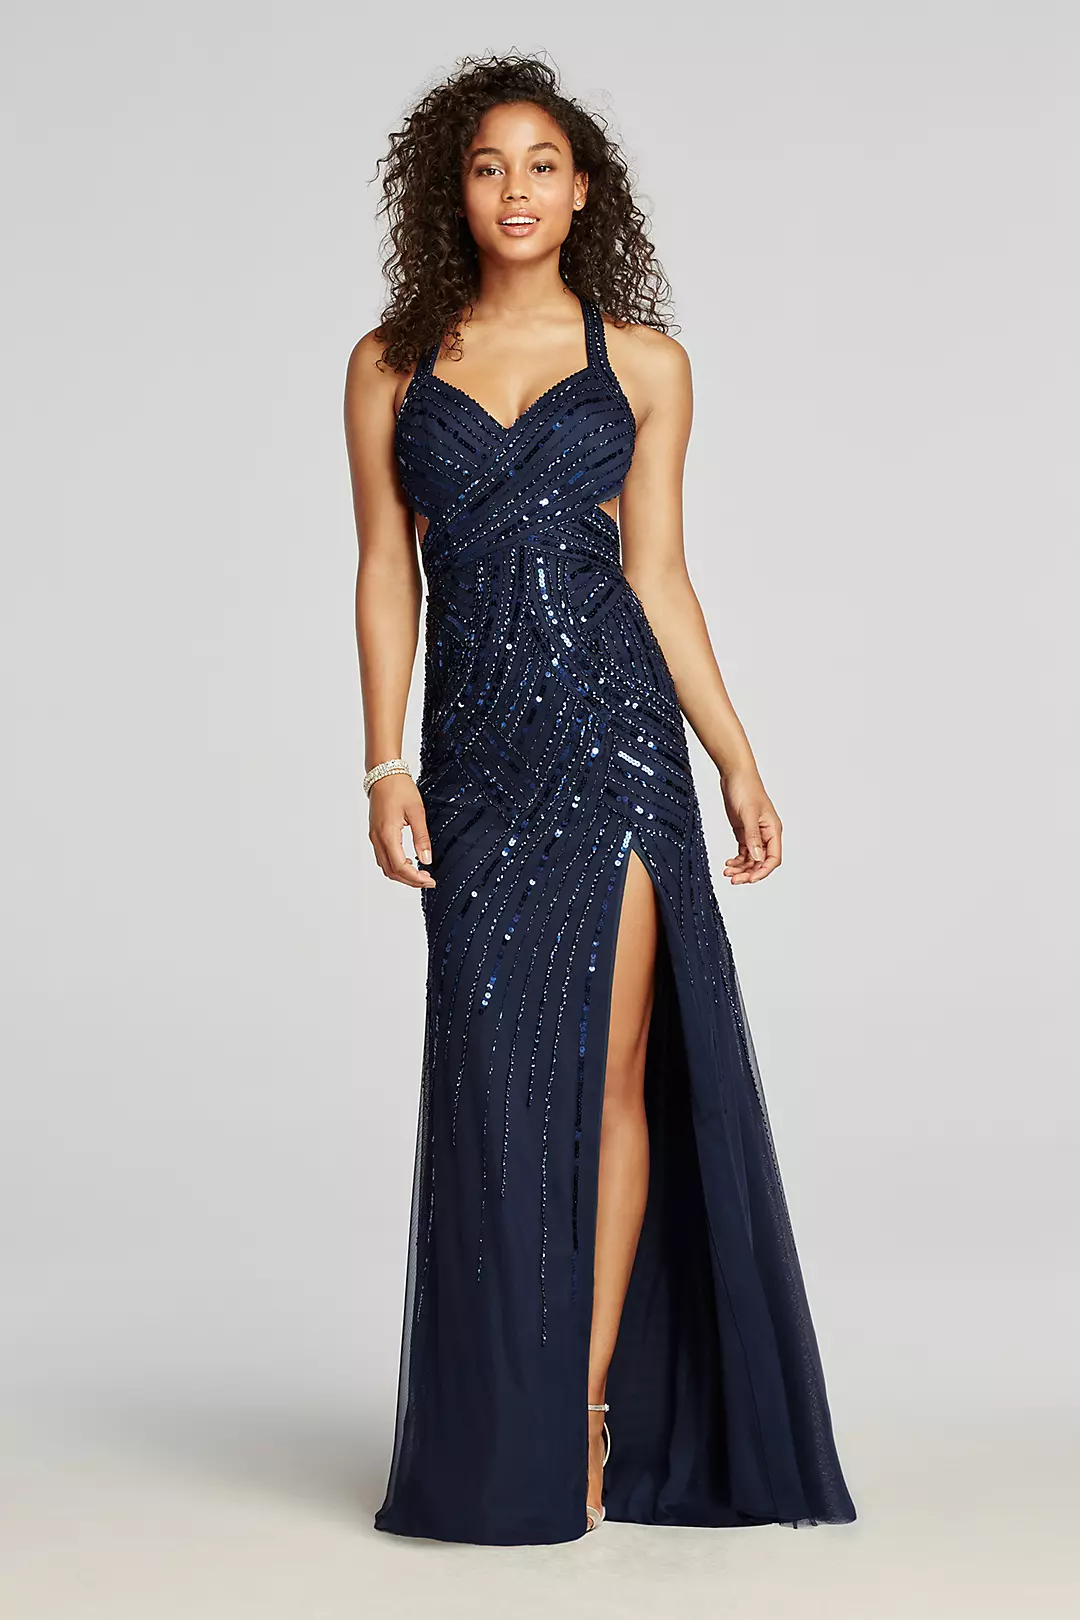 Halter Beaded Prom Dress with Thigh High Slit Image